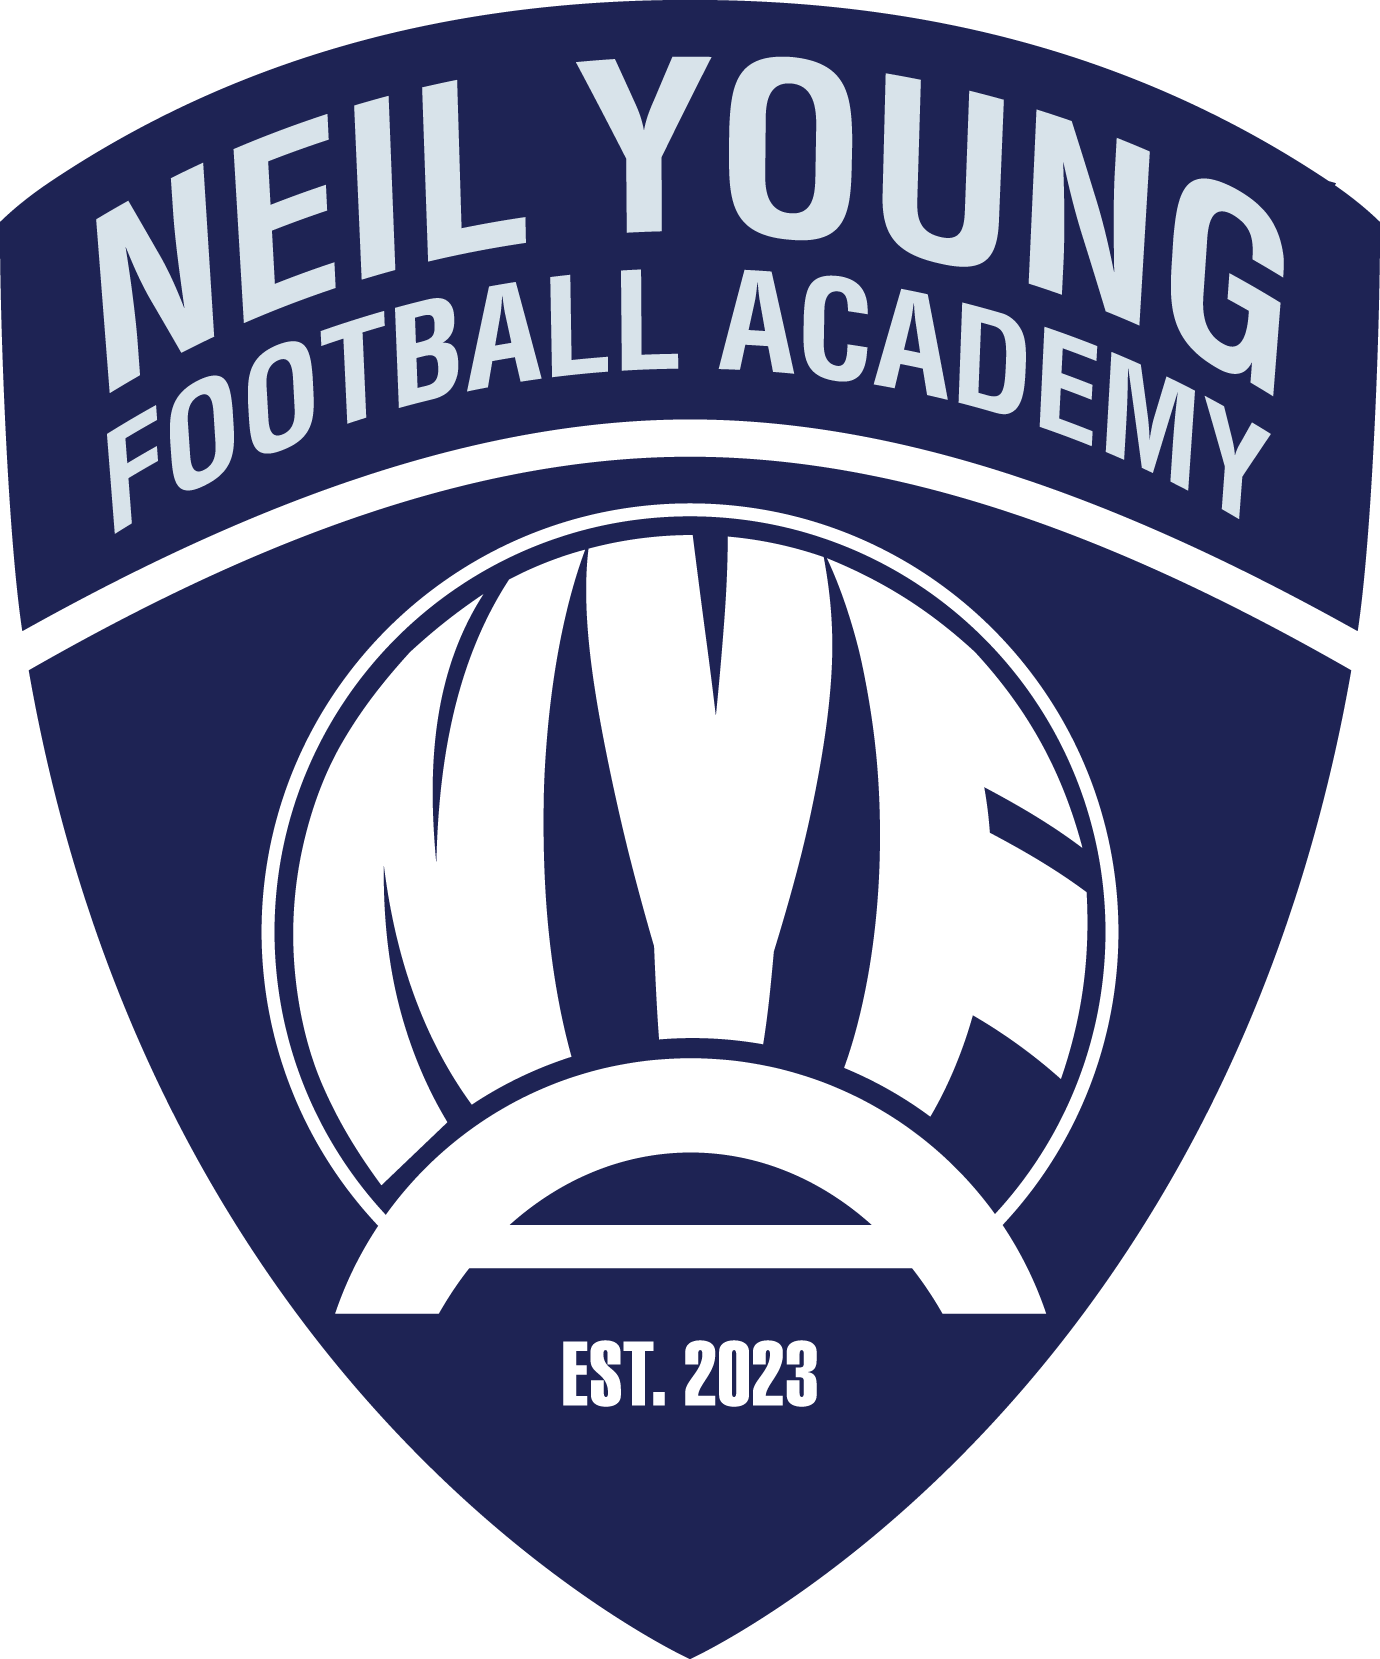 Neil Young Football Academy